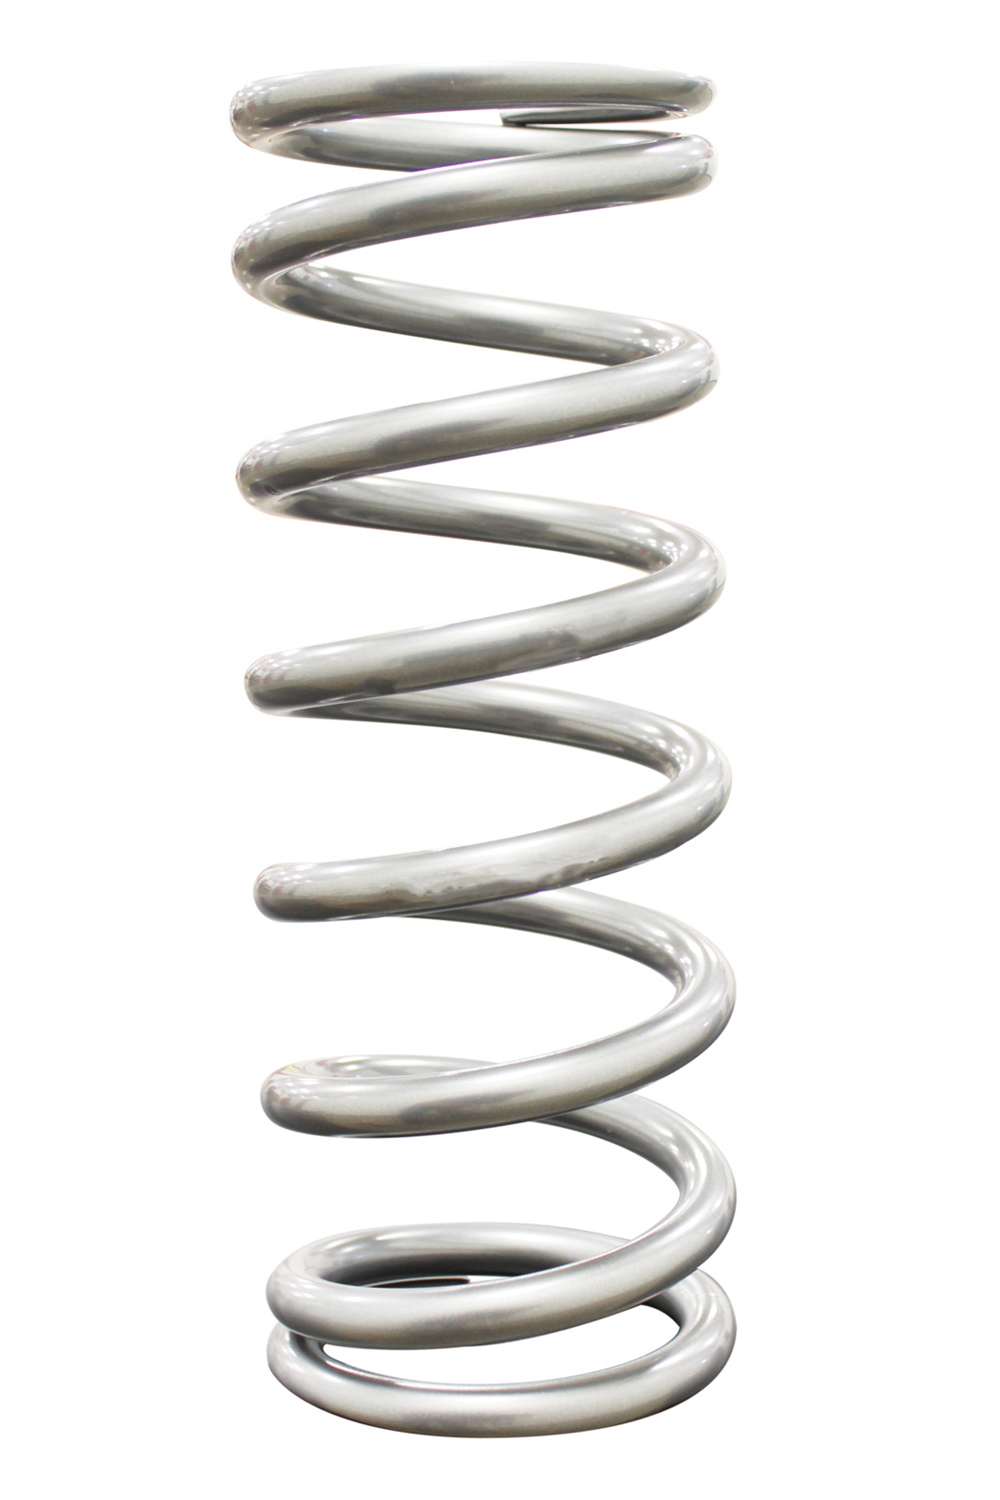 QA1 9HT550 Coil Spring, High Travel, Coil-Over, 2.500 in ID, 9.000 in Length, 550 lb/in Spring Rate, Steel, Silver Powder Coat, Each